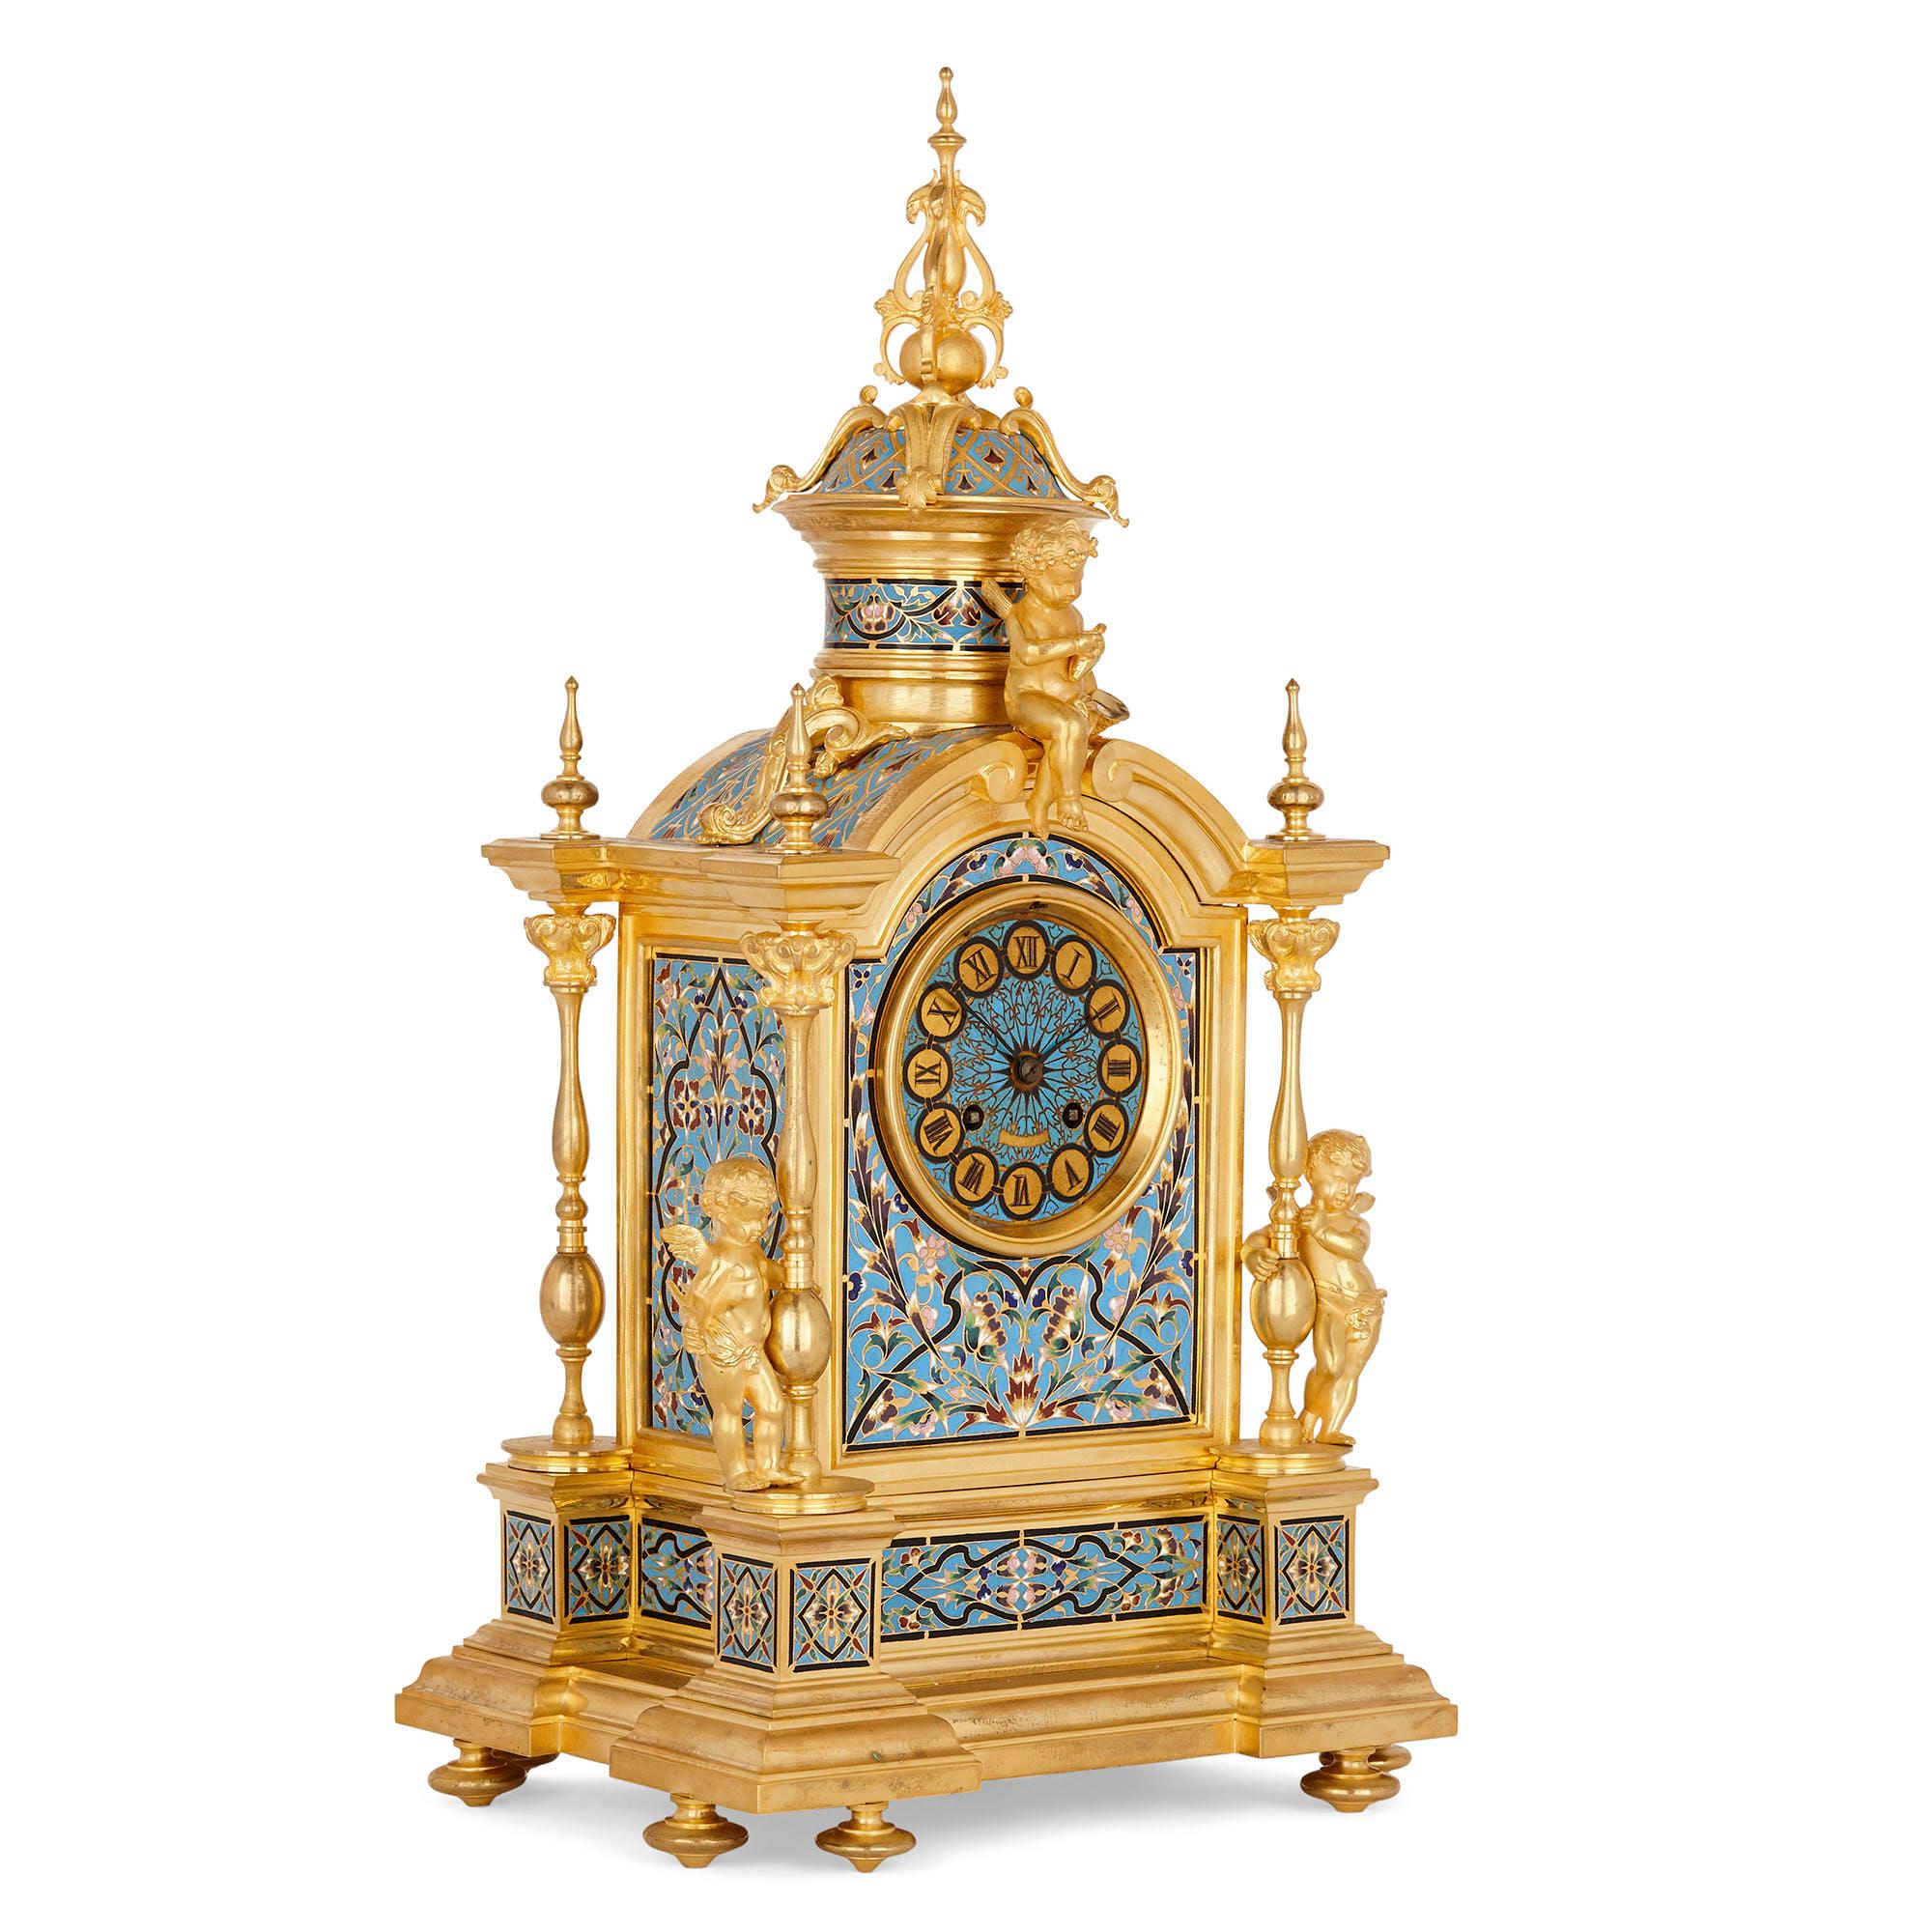 Renaissance style gilt bronze and enamel mantel clock
French, late 19th century
Measures: Height 53cm, width 28cm, depth 23cm

This exquisite mantel clock is crafted in the idiosyncratic Renaissance Revival style that found its fullest